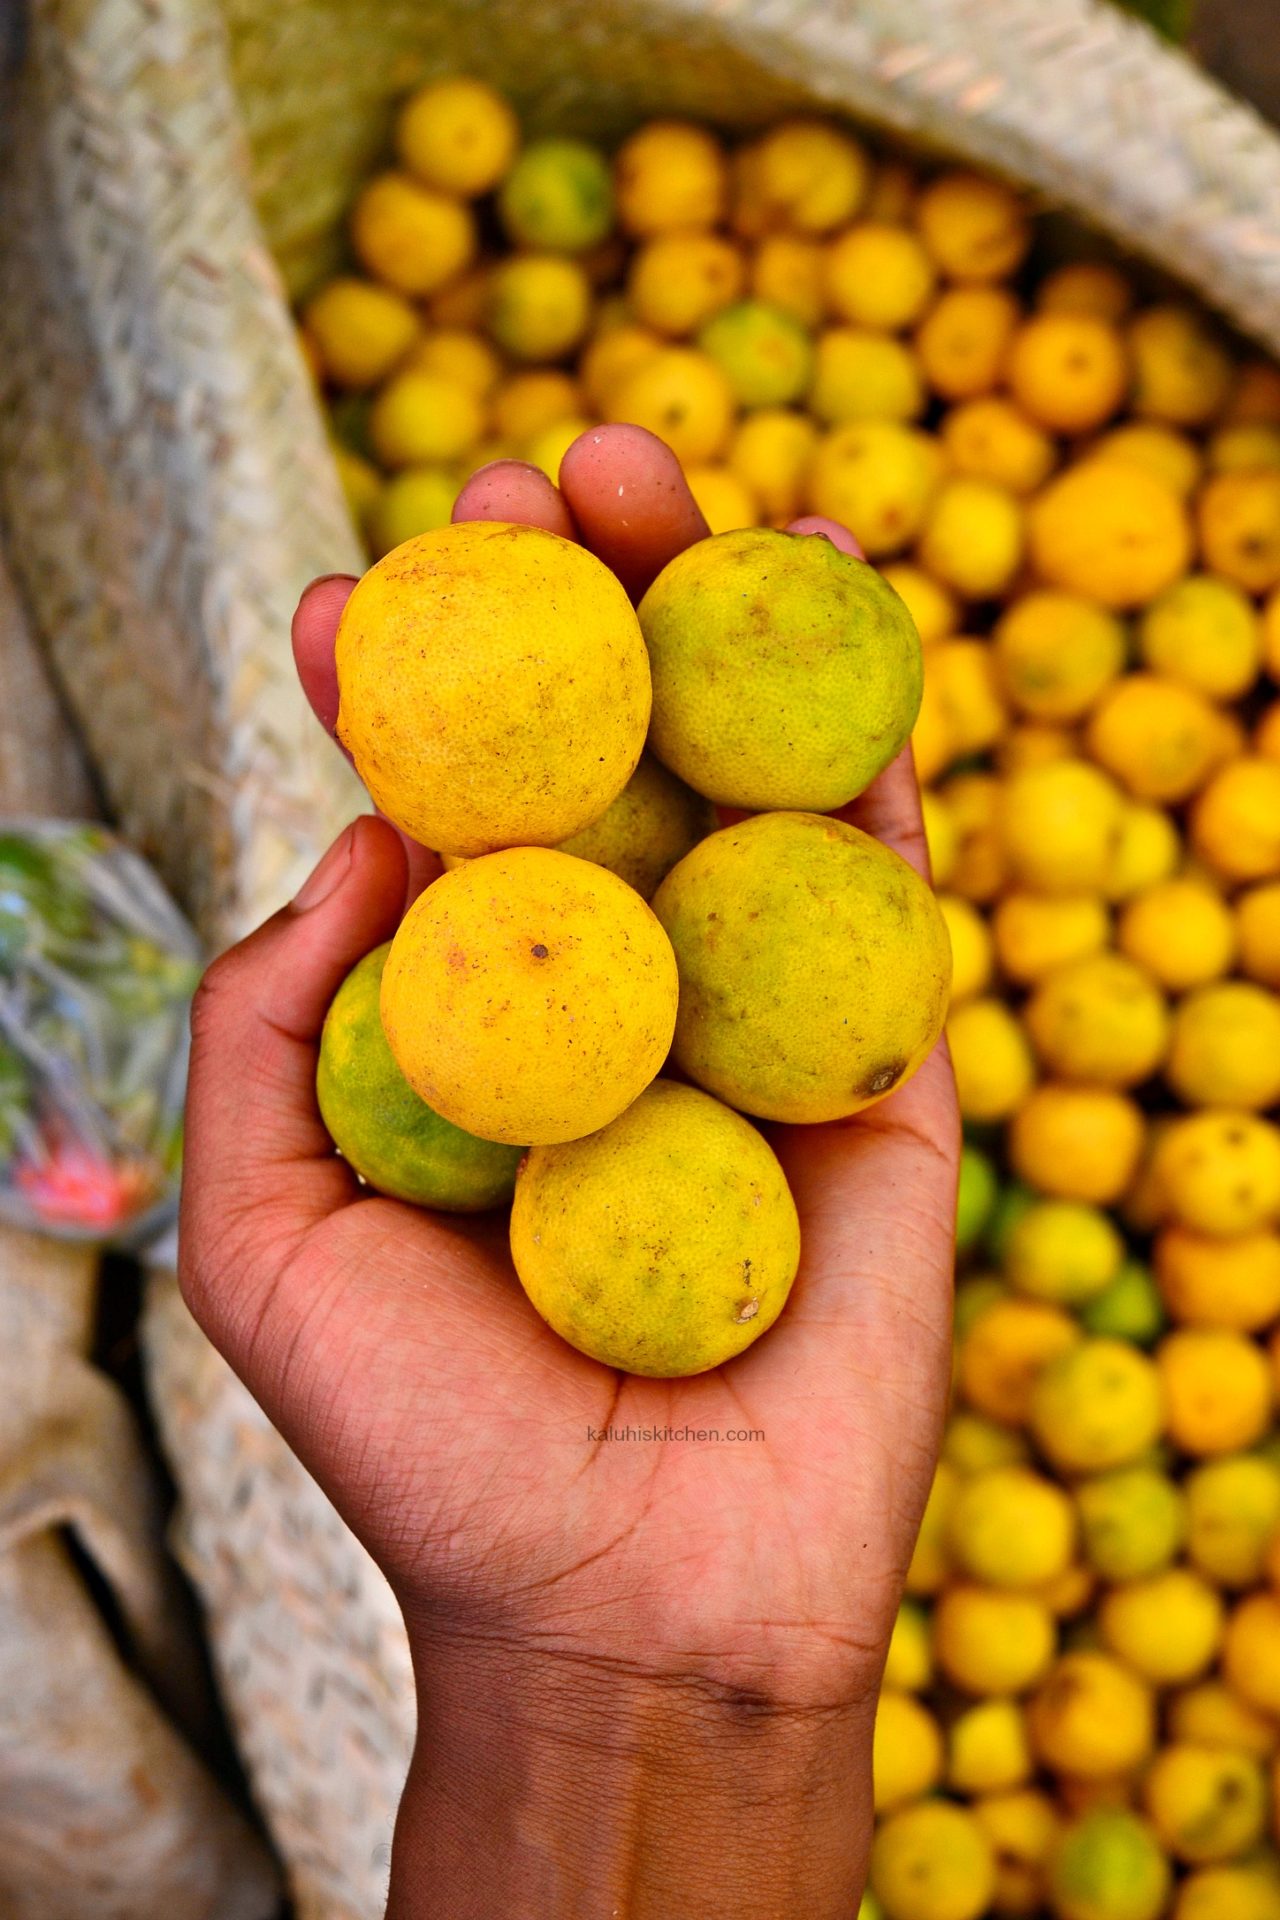 fresh limes are common through out thekenyan coast and are served as juice for both locals and forgeiners_lamu food fectival_kaluhiskitchen.com